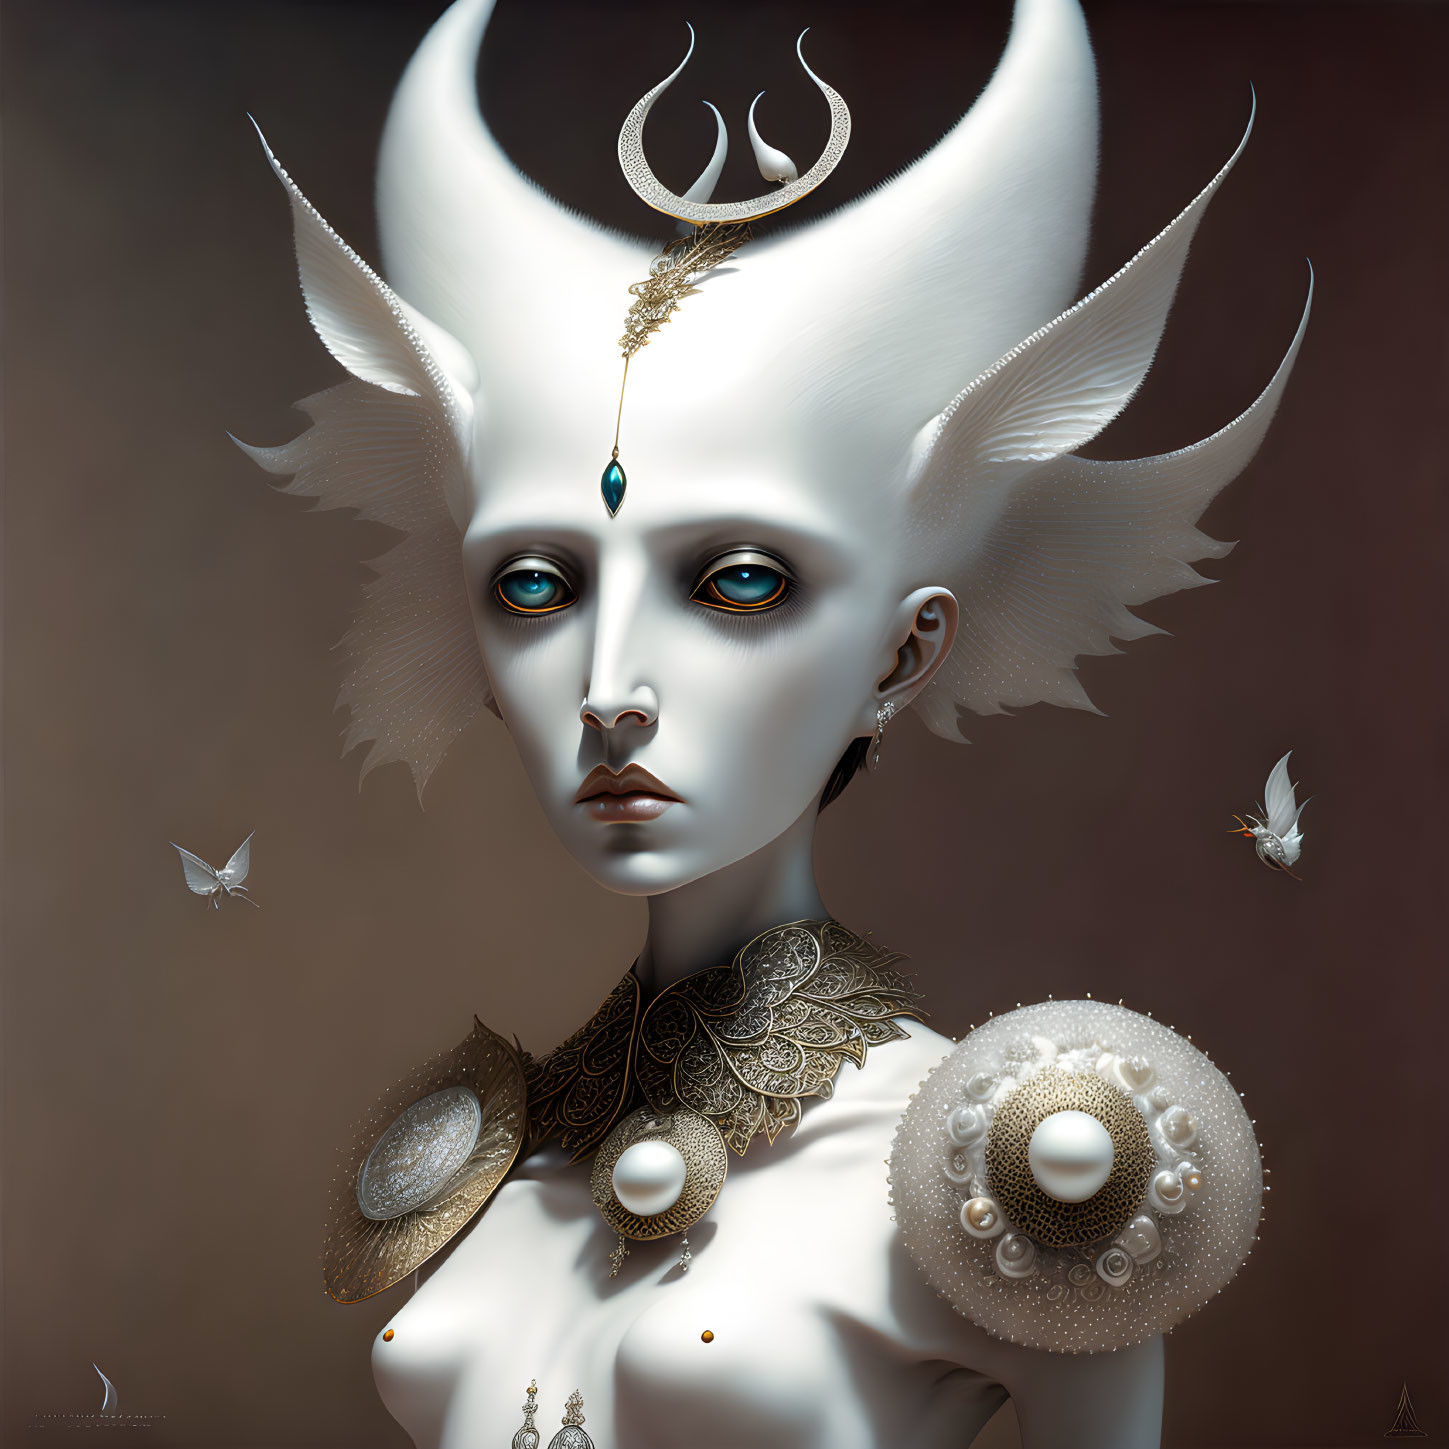 Surreal portrait of female figure with pale skin, blue eyes, white headpiece, gold jewelry